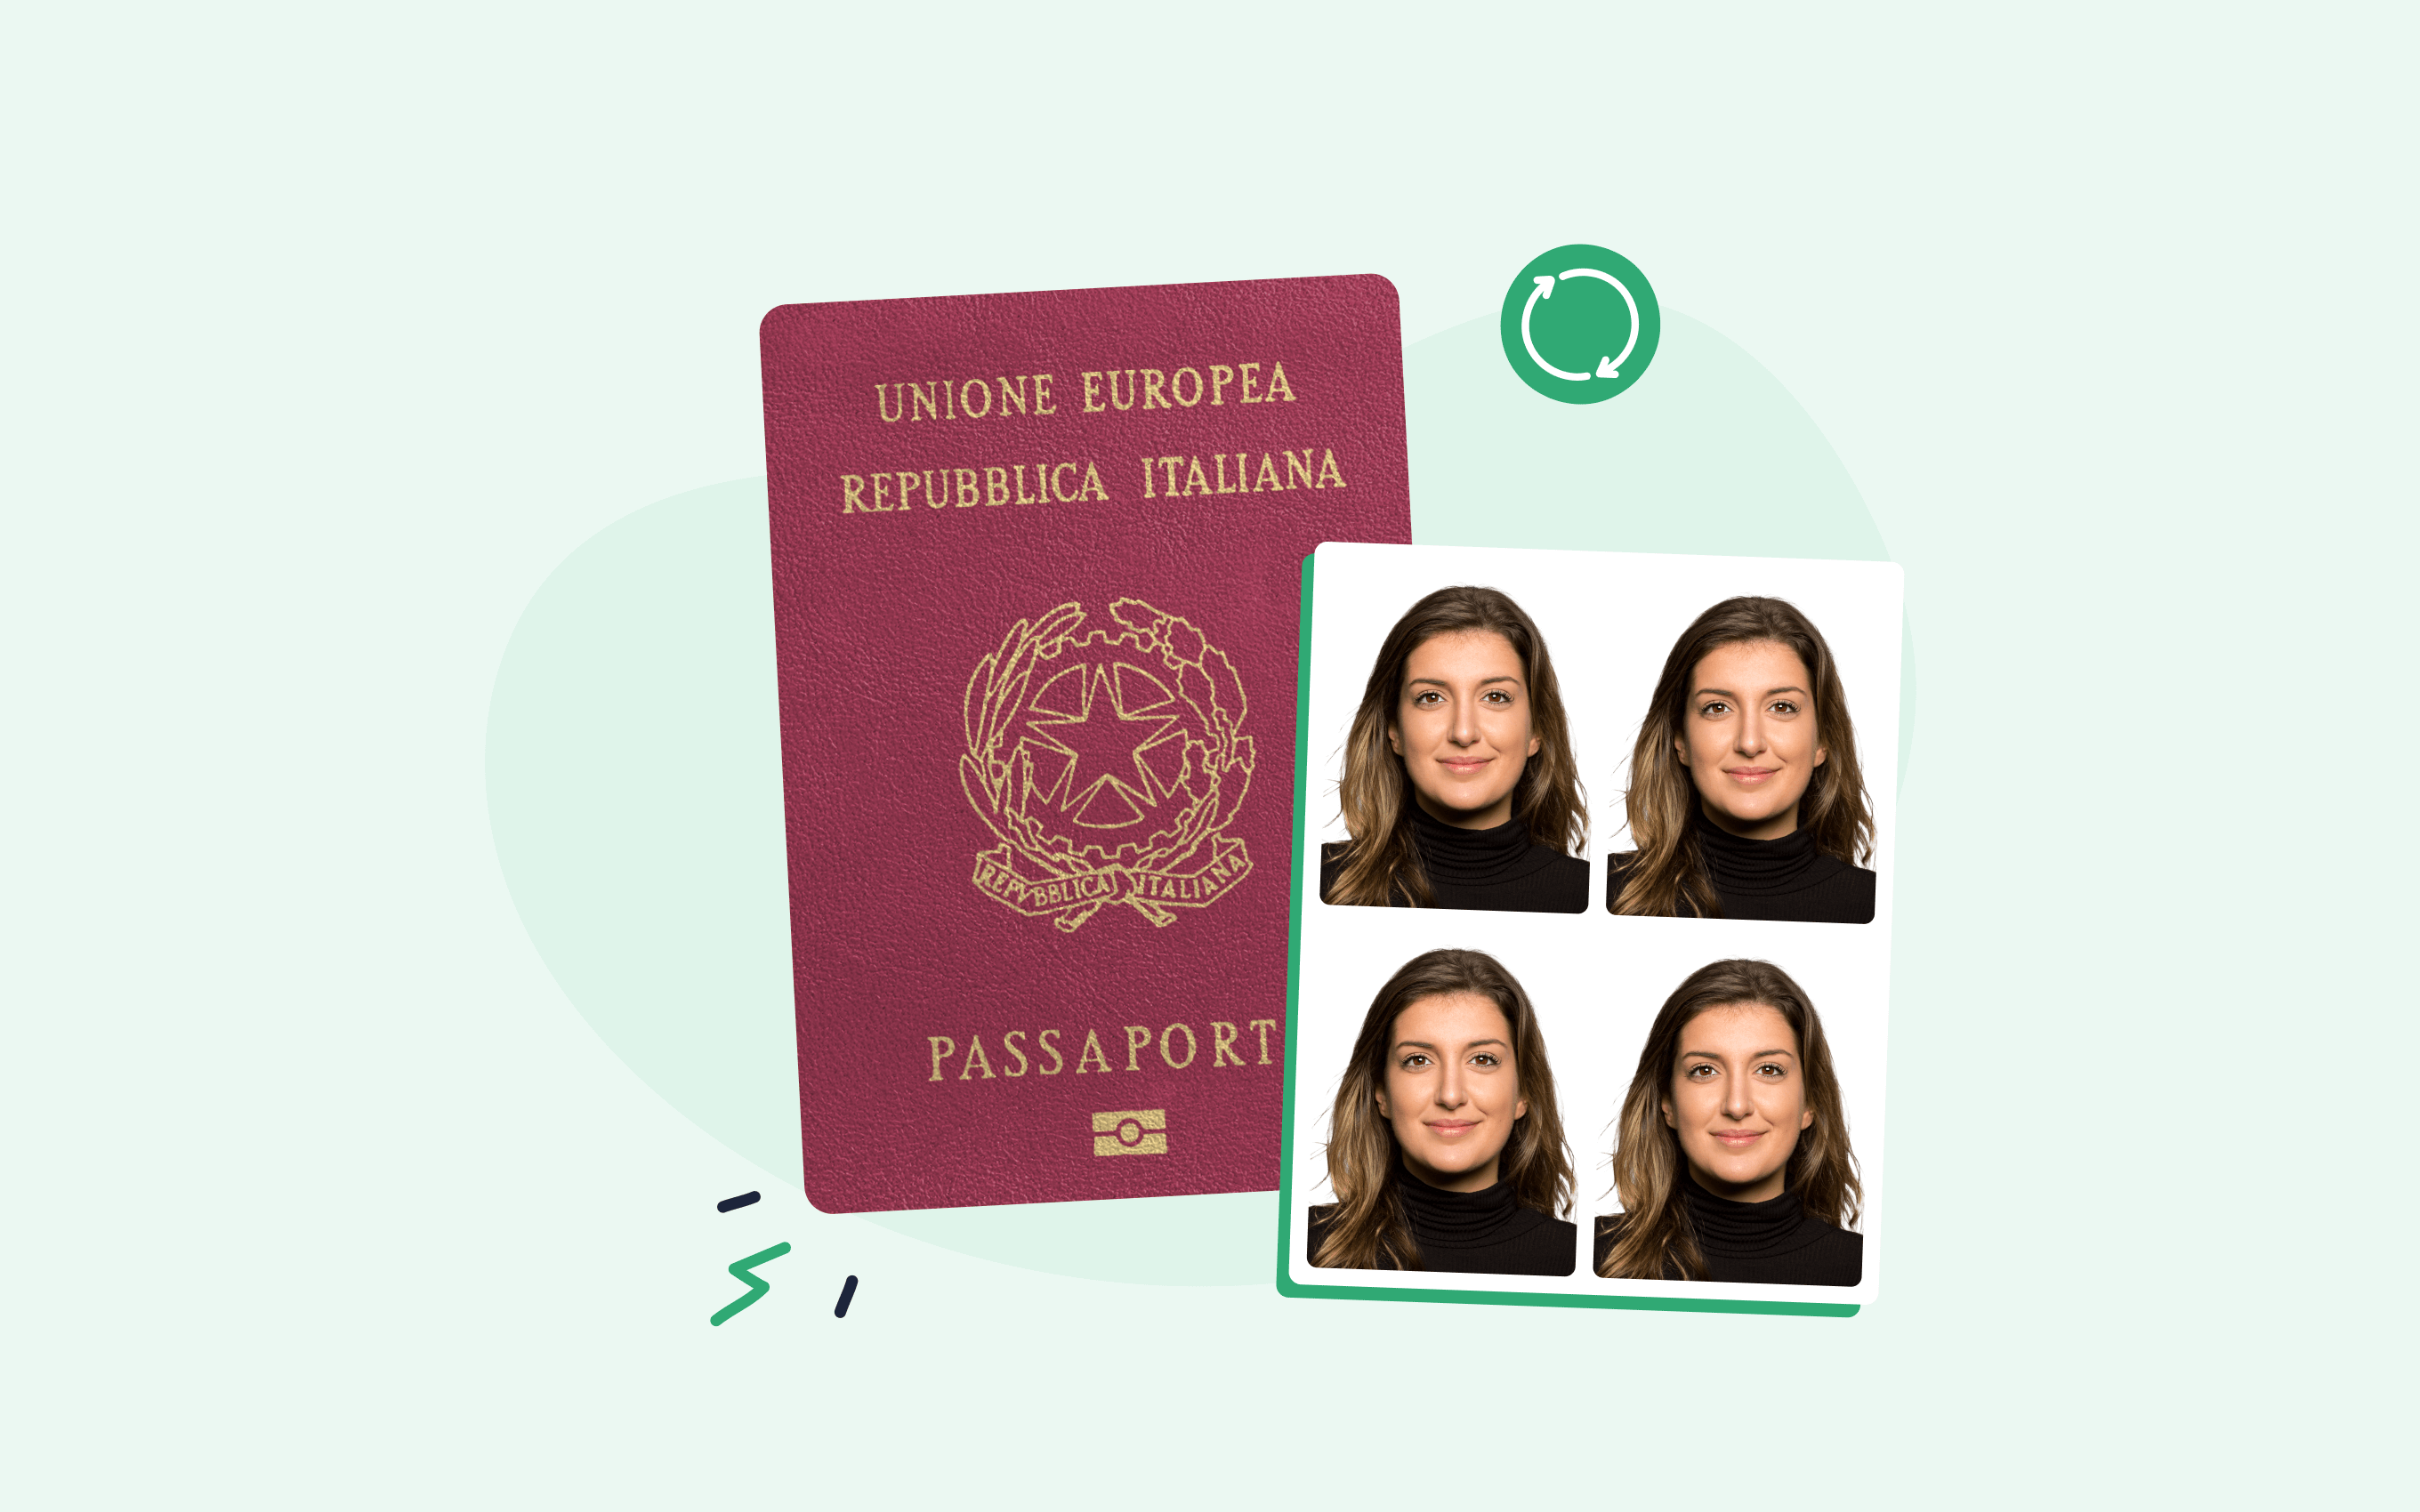 What to Wear in a Passport Photo: UK Dress Code Guide